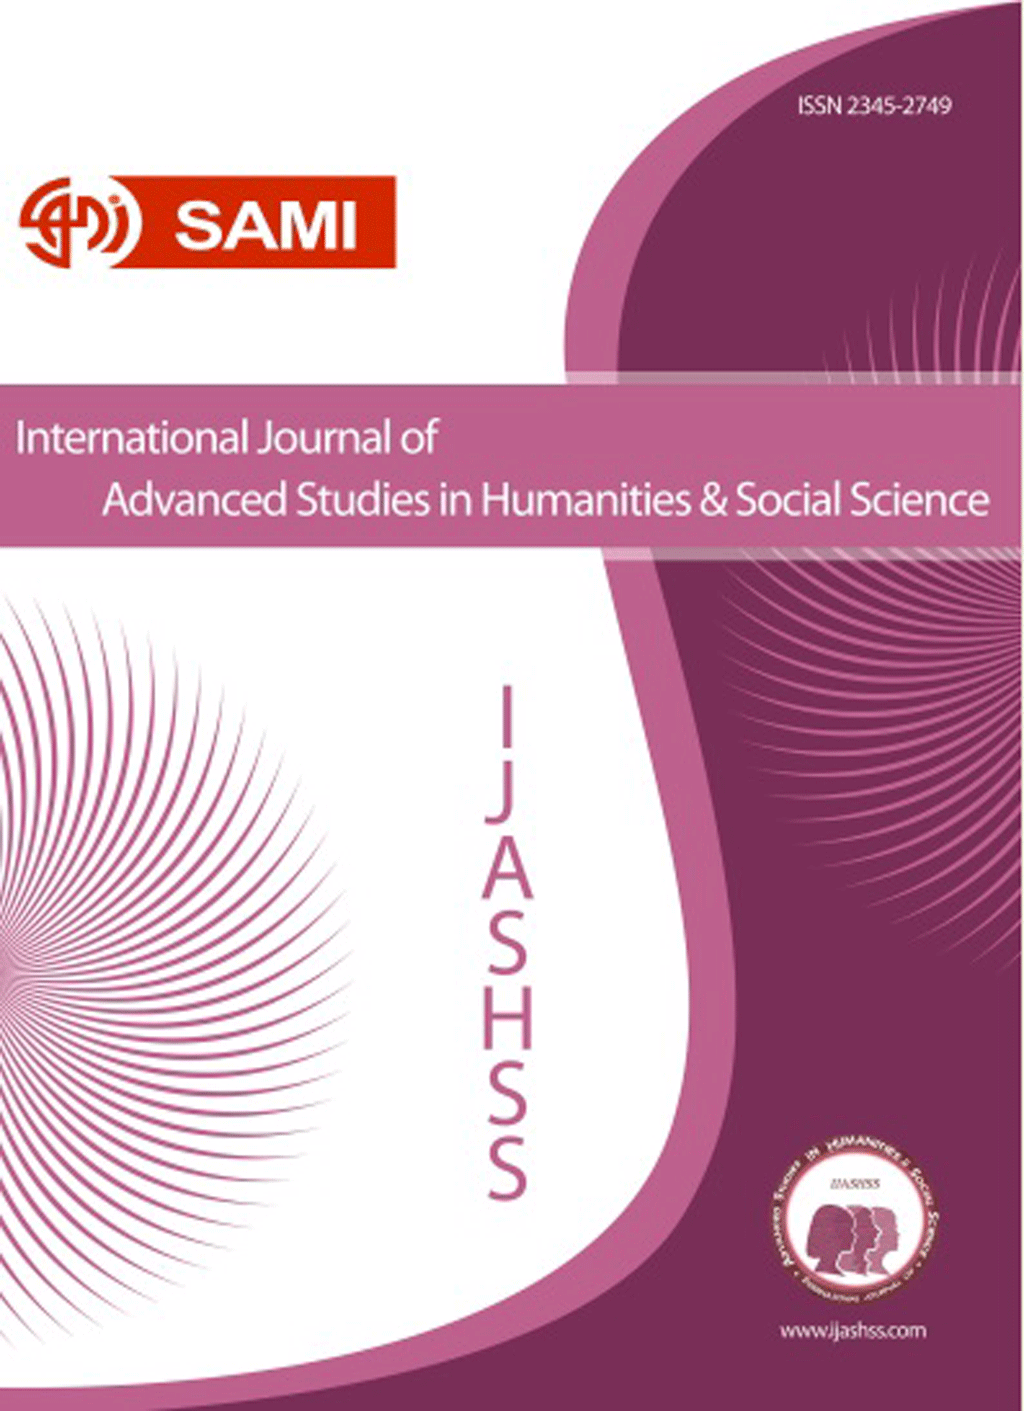 International Journal of Advanced Studies in Humanities and Social Science - January 2020, Volume 9 -  Issue 1